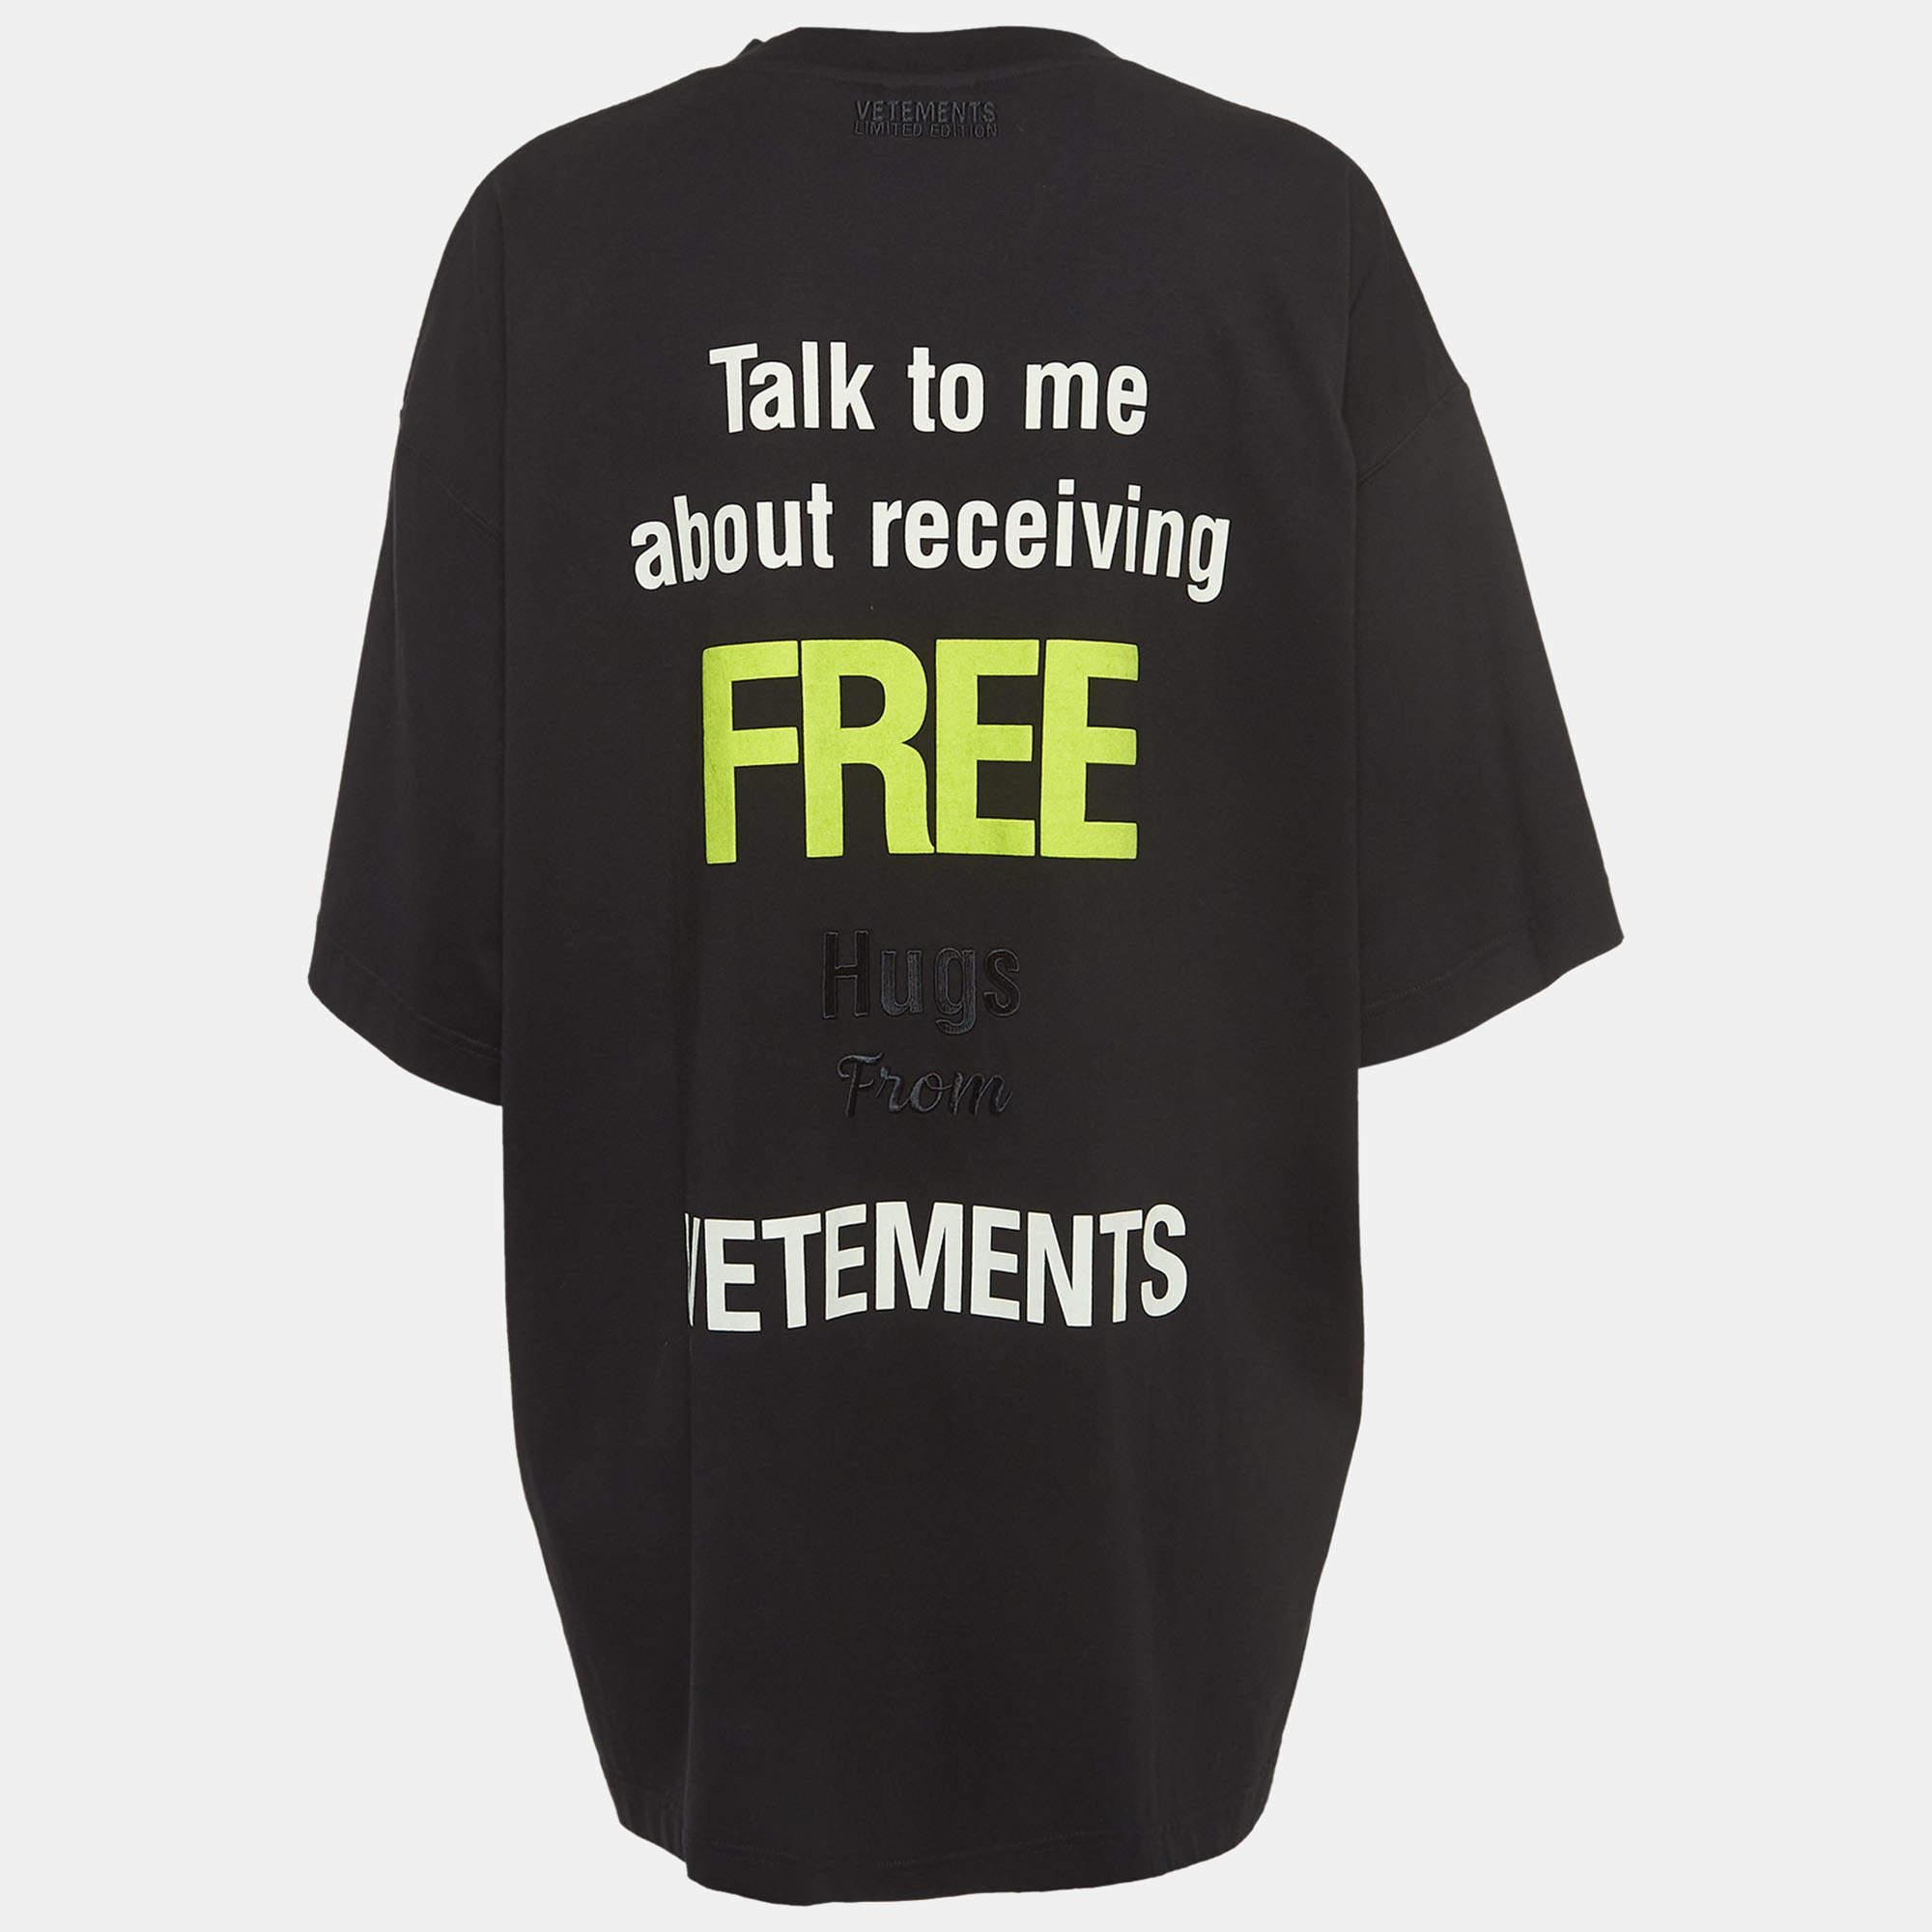 A perfect combination of comfort, luxury, and style, this limited-edition Vetements t-shirt is a must-have piece! Made from quality materials, the creation can be styled with denim pants and sneakers for a cool look.

